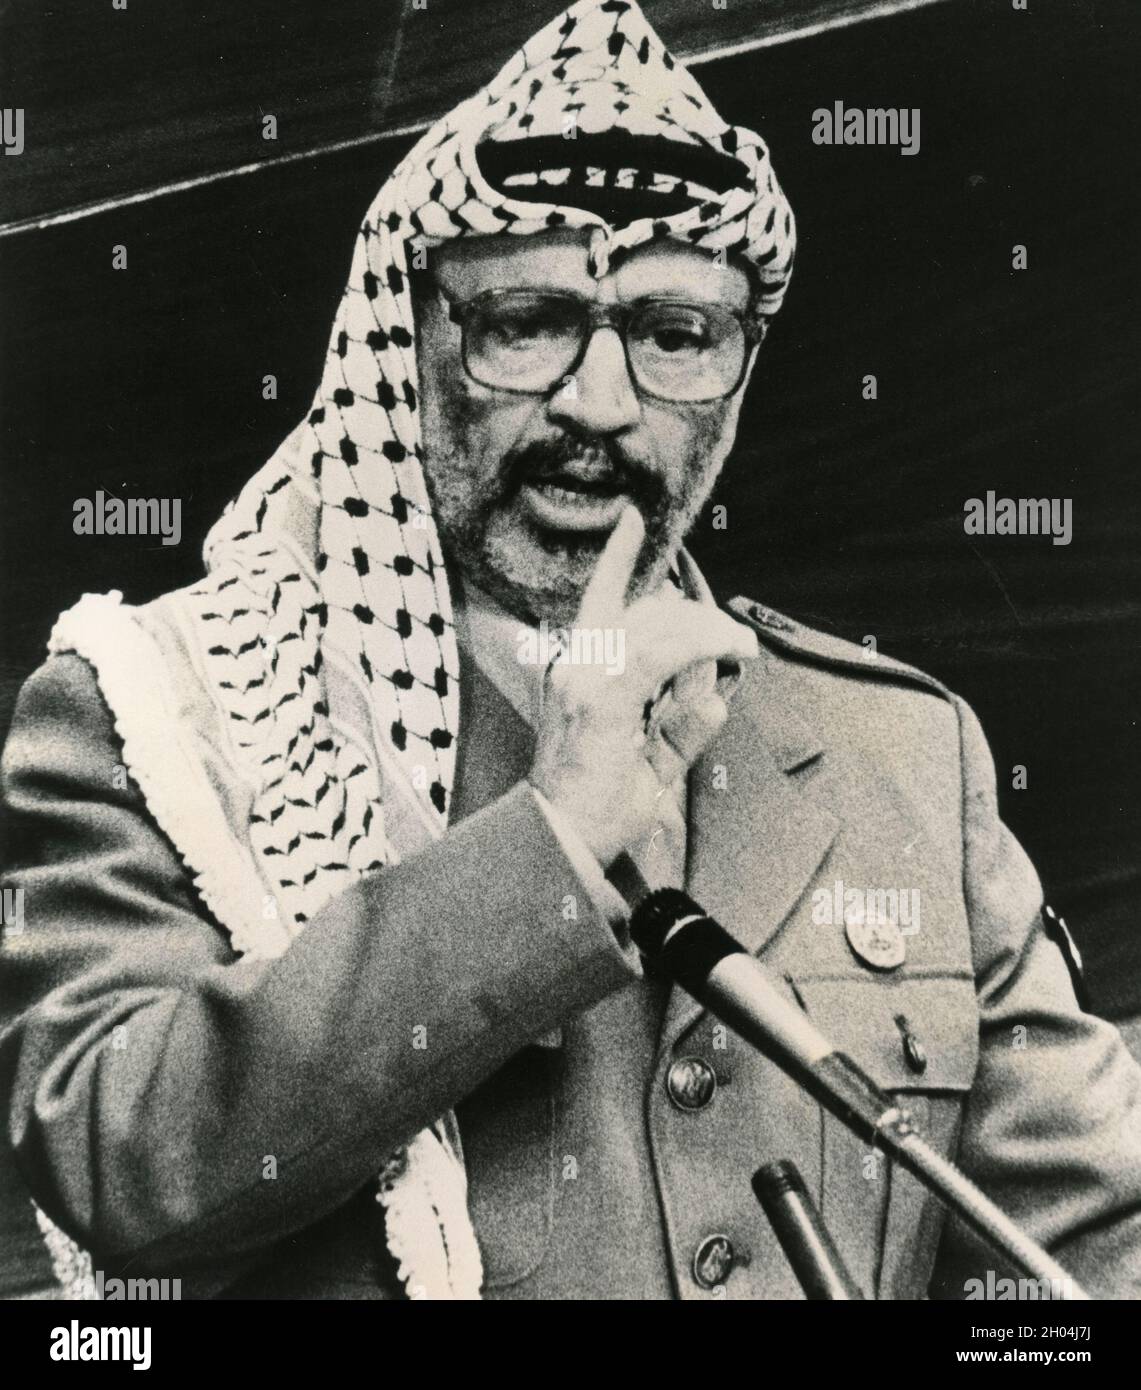 Palestinian politician and PLO President Yasser Arafat at a rally, 1980s Stock Photo